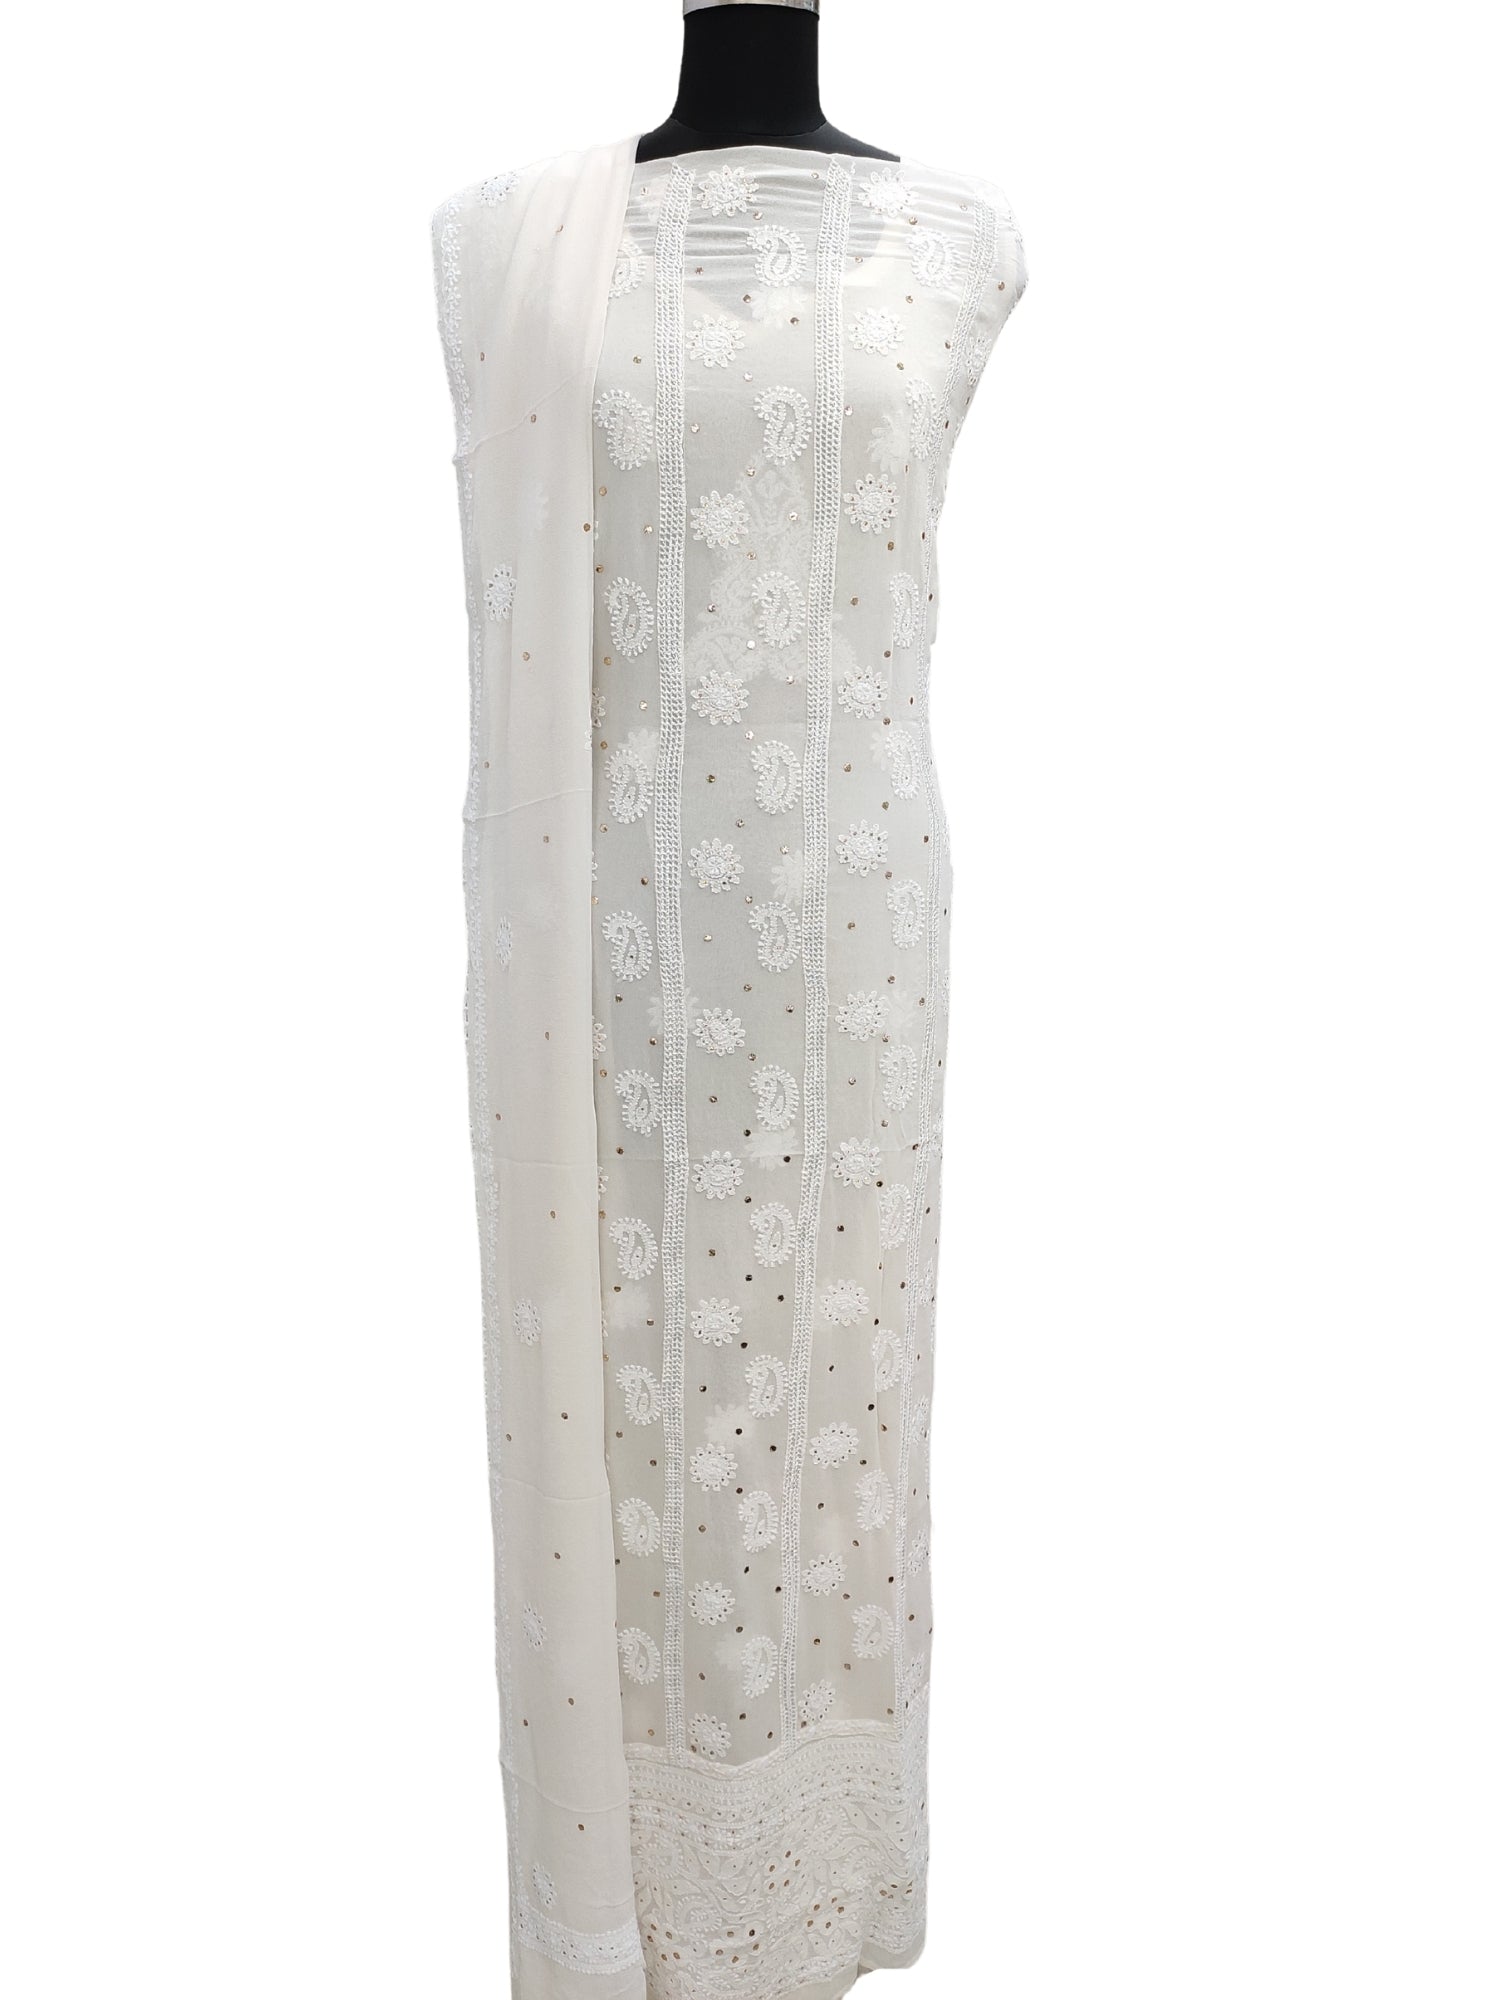 Shyamal Chikan Hand Embroidered White Pure Georgette Lucknowi Chikankari Unstitched Suit Piece With Mukaish and Crosia Work - S2674